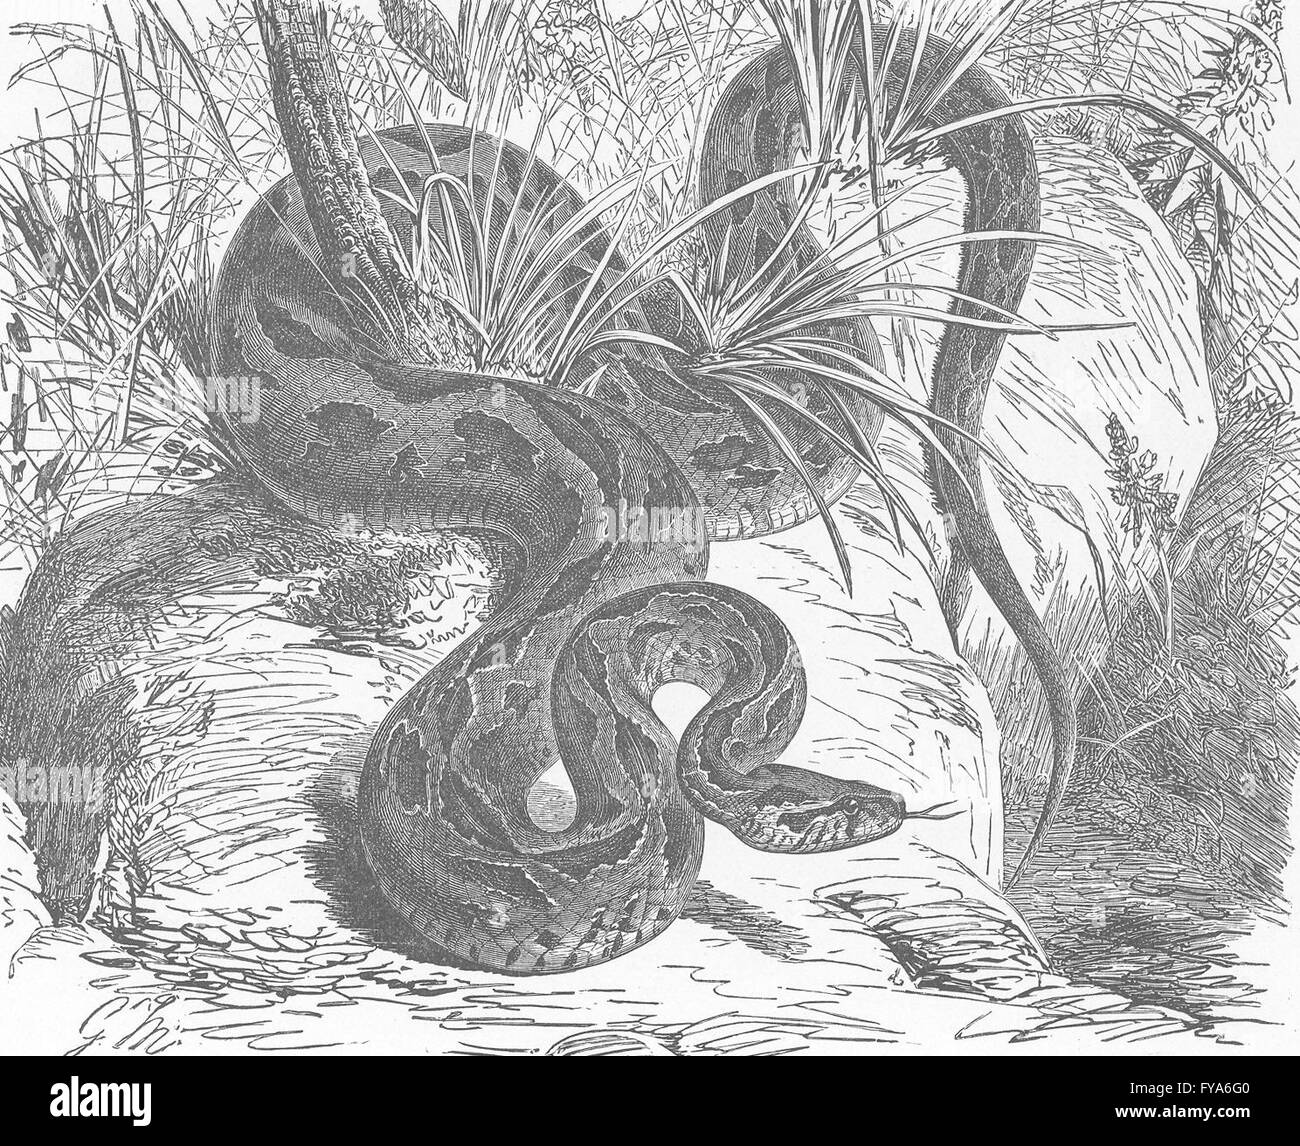 Serpent Black and White Stock Photos & Images - Alamy